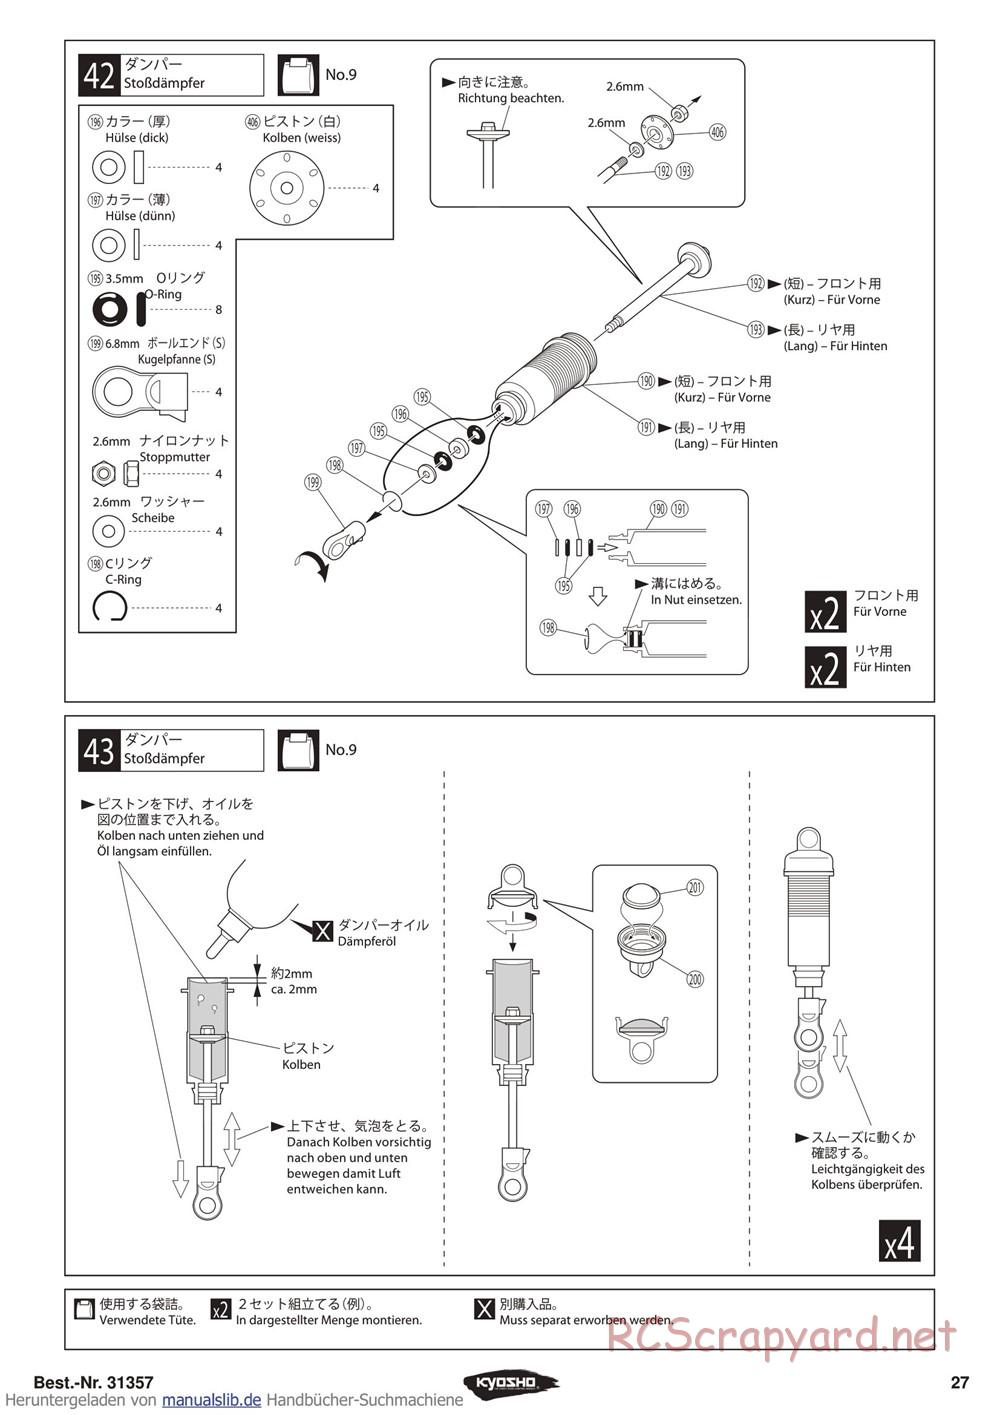 Kyosho - Inferno ST-RR Evo - Manual - Page 27